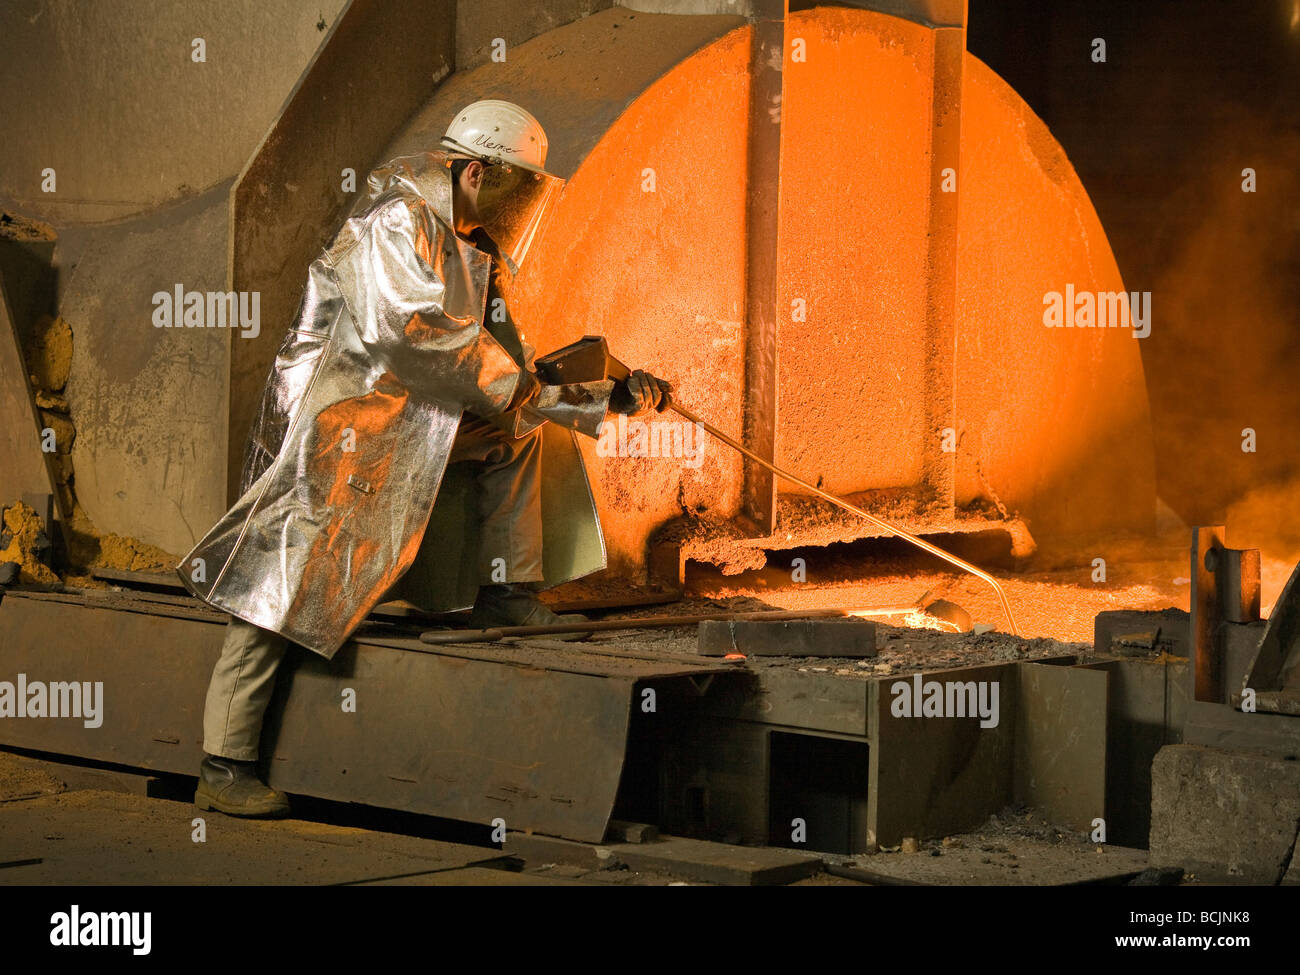 Worker with protective clothes at steel plant Stock Photo